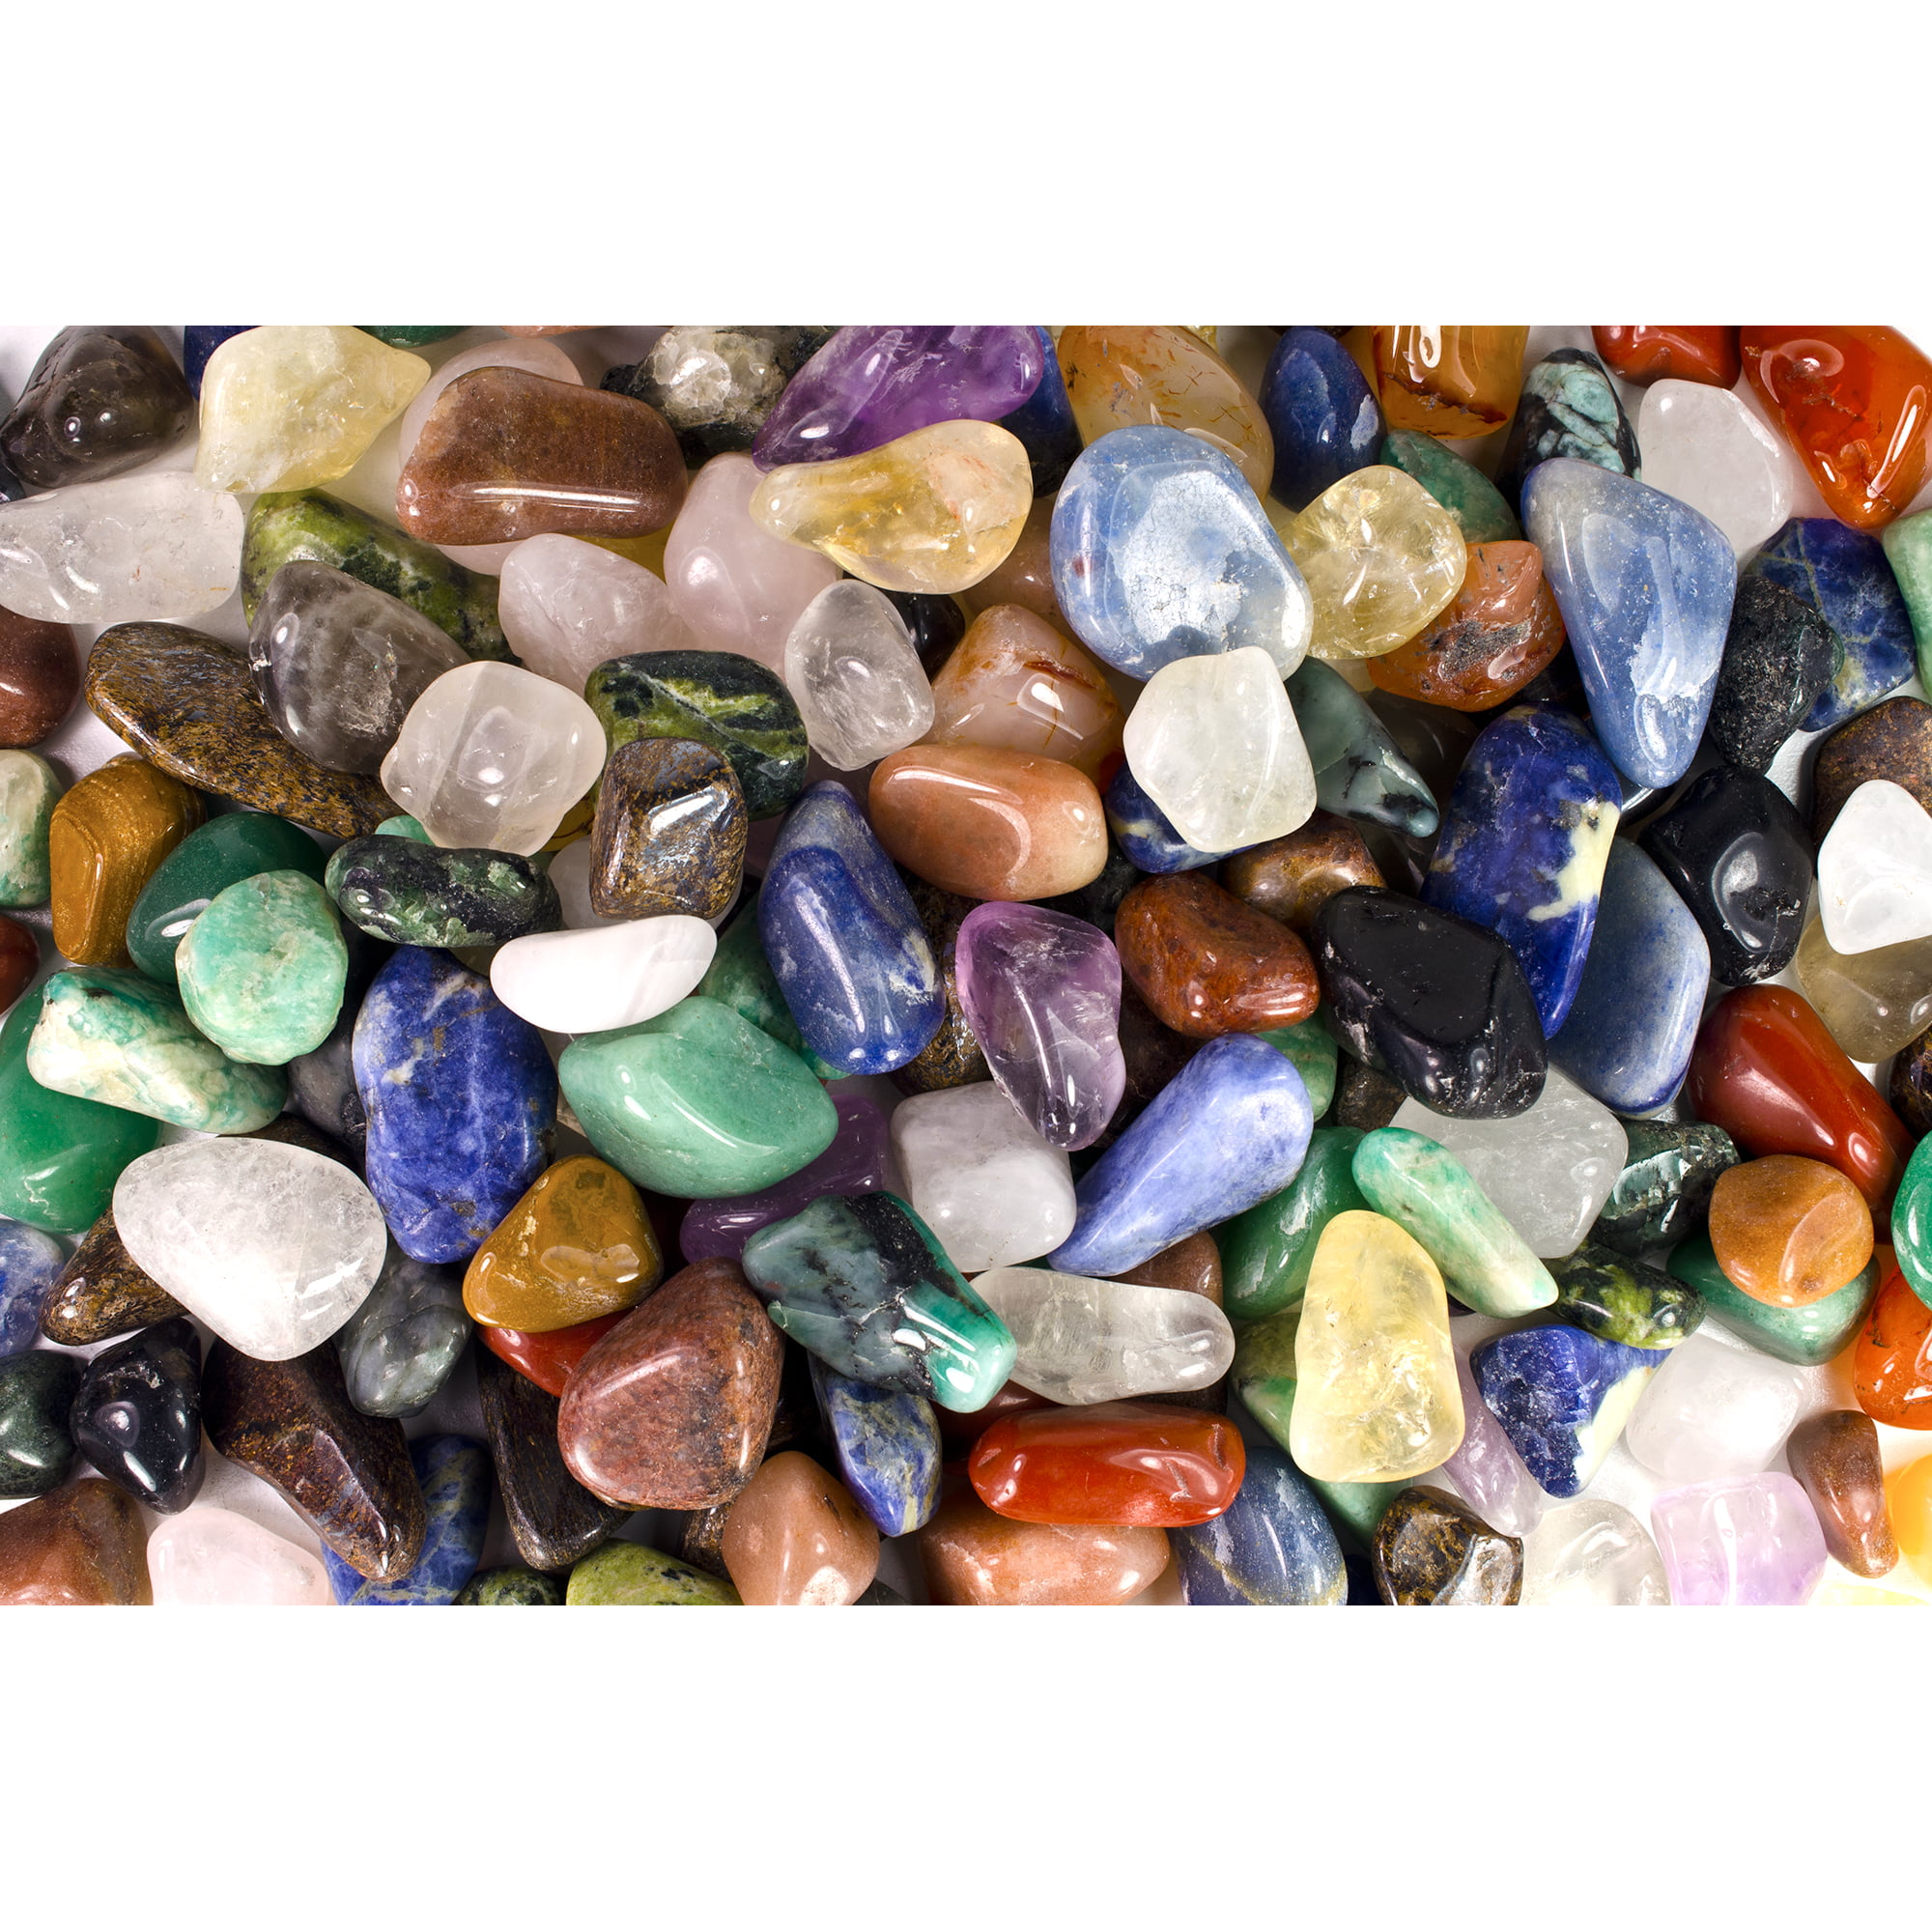 0.5" to 1" 1 lb Crystal with Sulpher Tumbled Stones XSmall Grade 1 